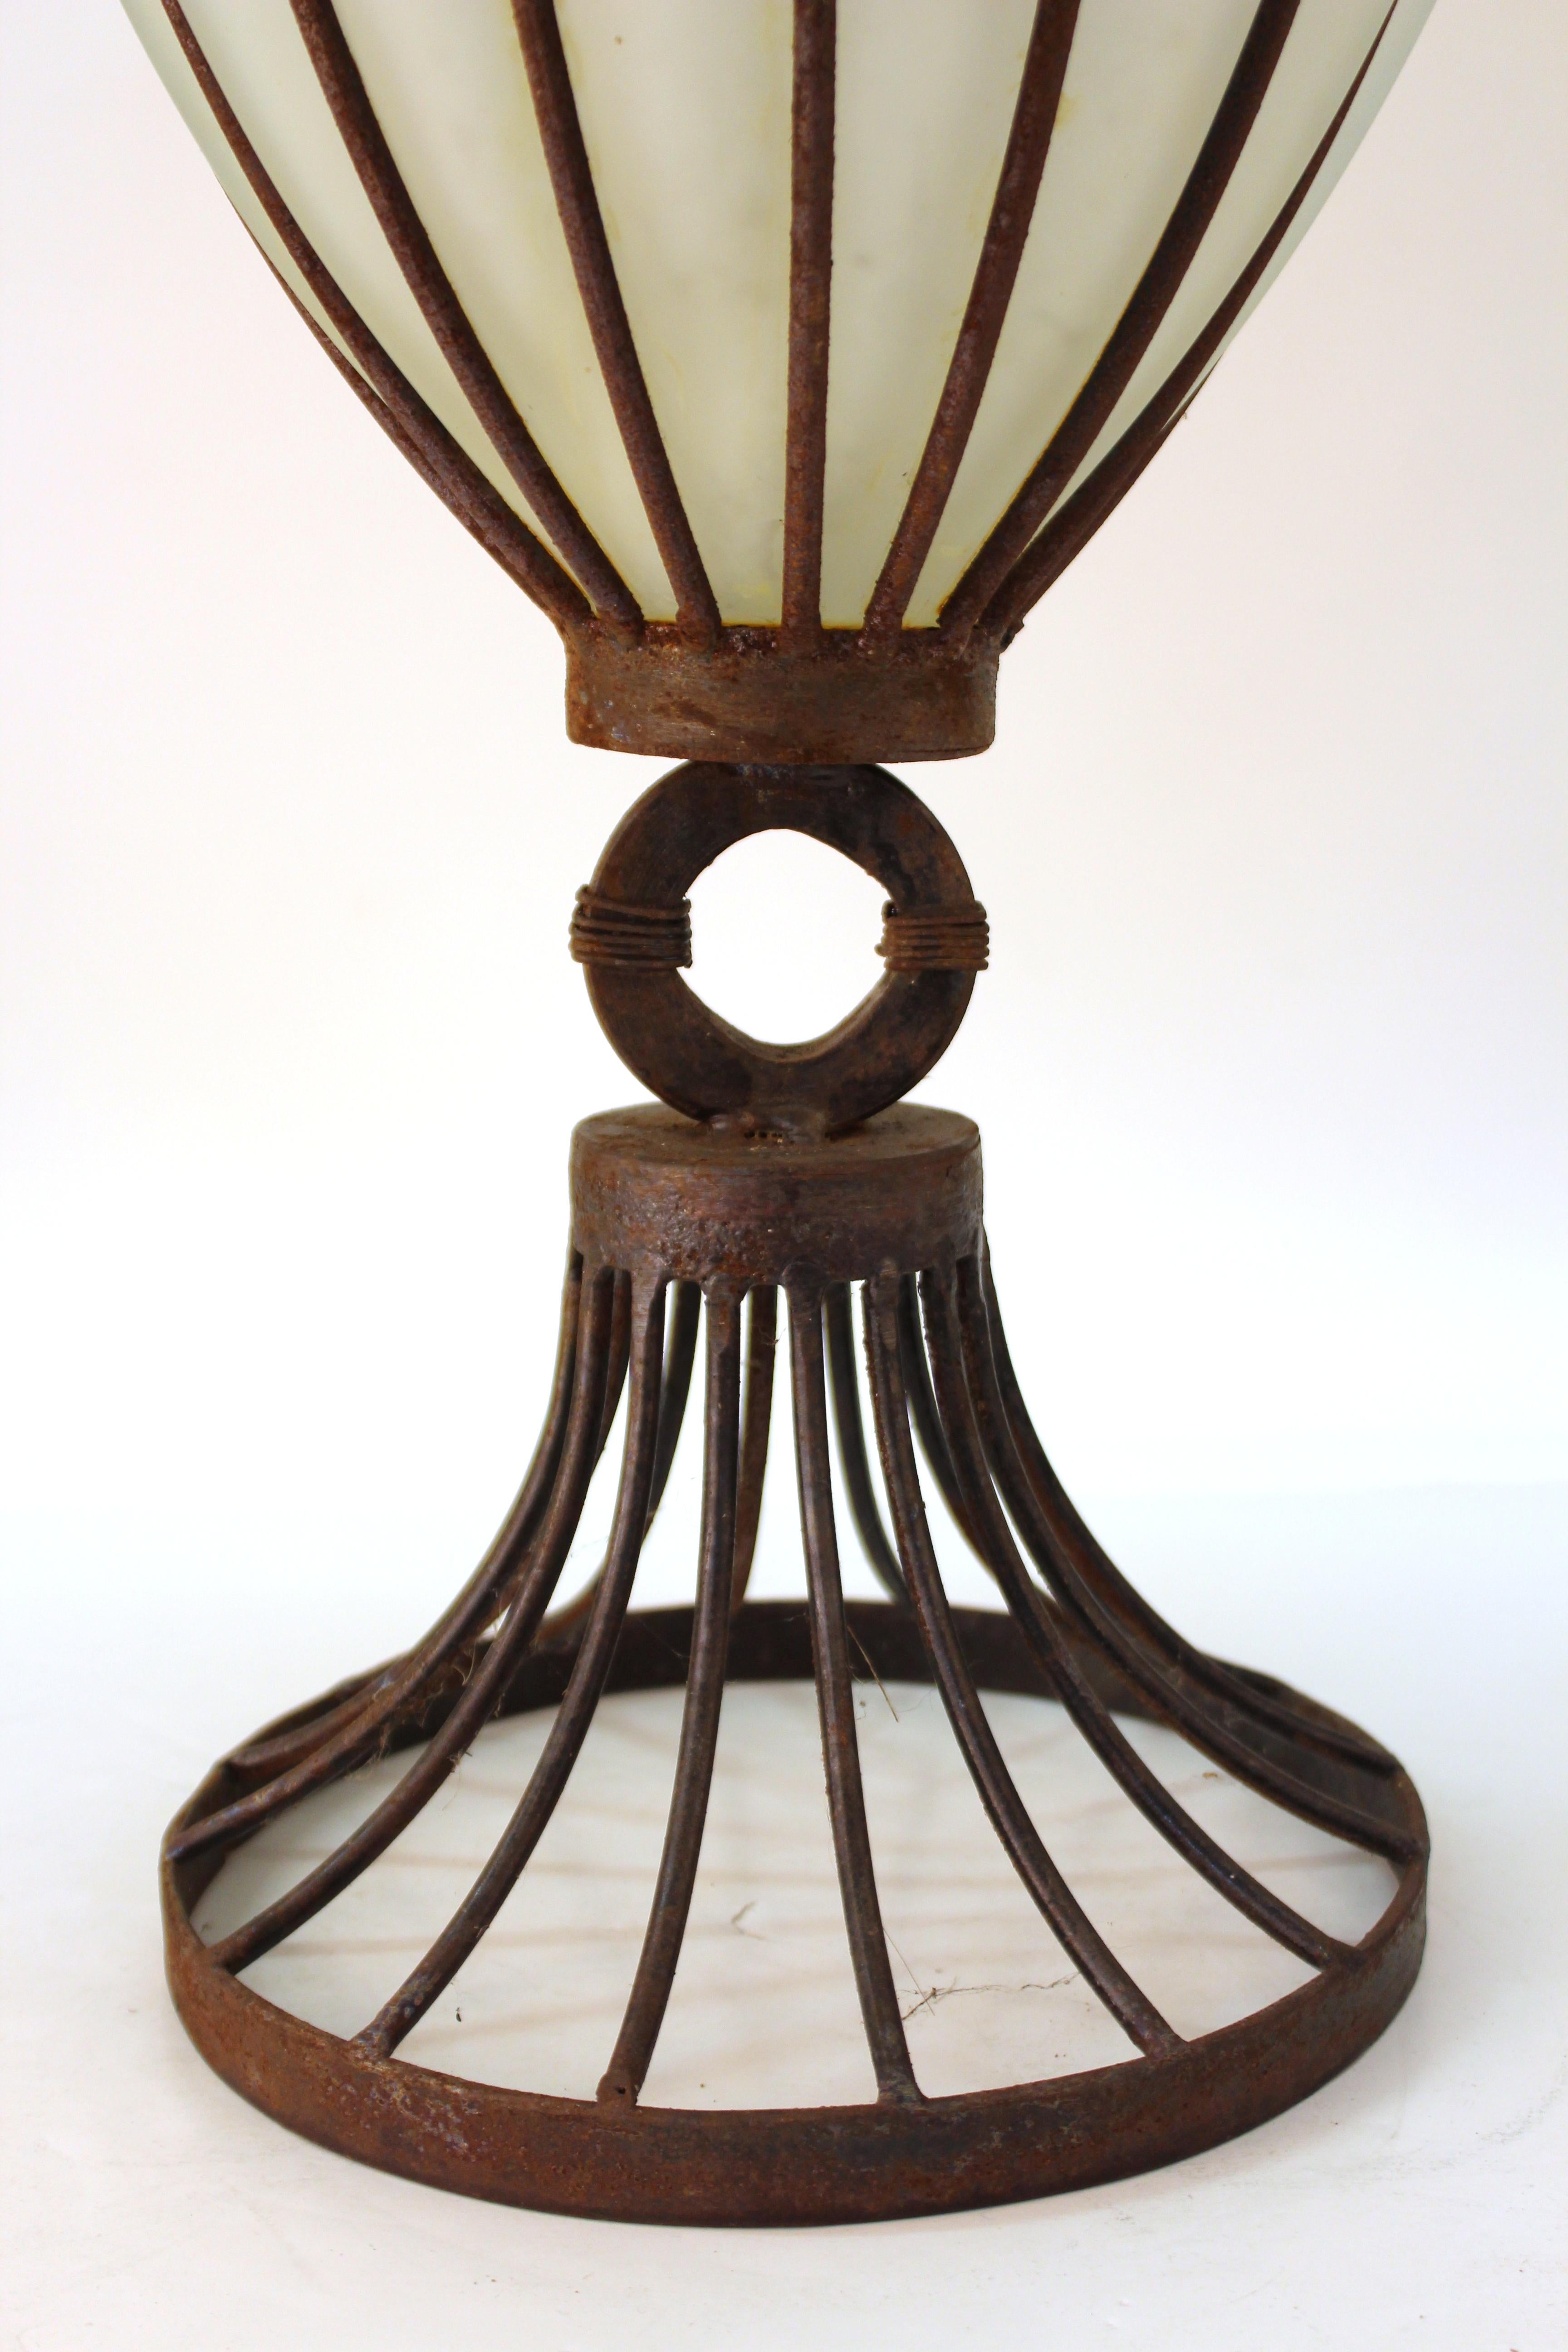 American Art Deco period monumental iron framed glass vase. The piece has age-appropriate rust on the metal surfaces and is in great vintage condition.